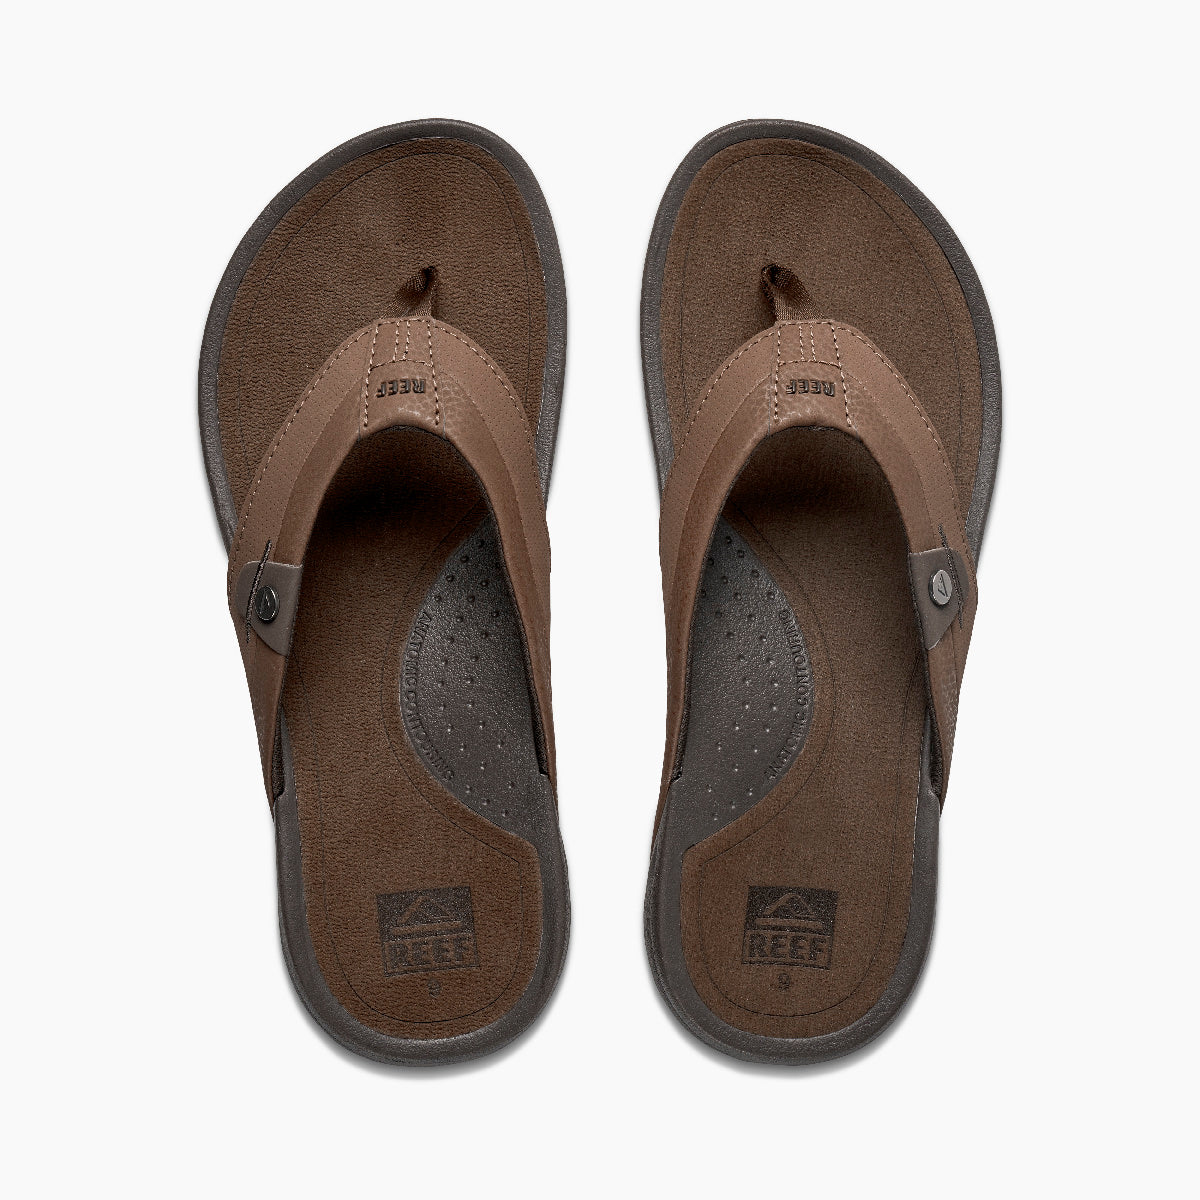 Reef Pacific Men's Sandals - Free Shipping